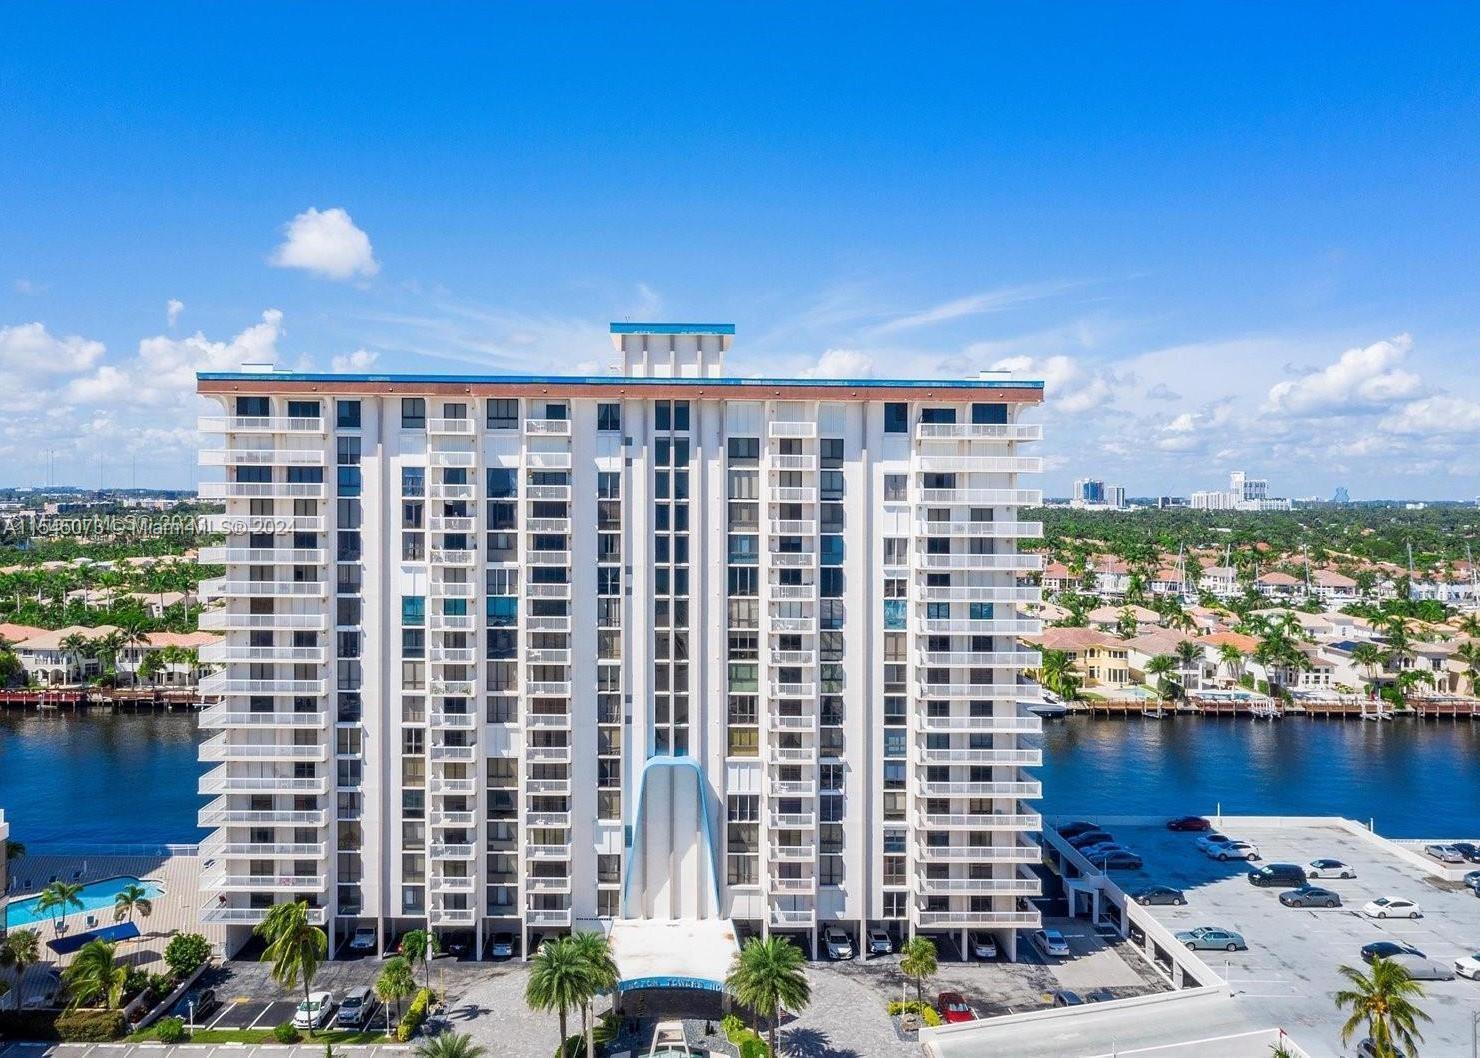 Photo of 1500 S Ocean Dr #16B in Hollywood, FL